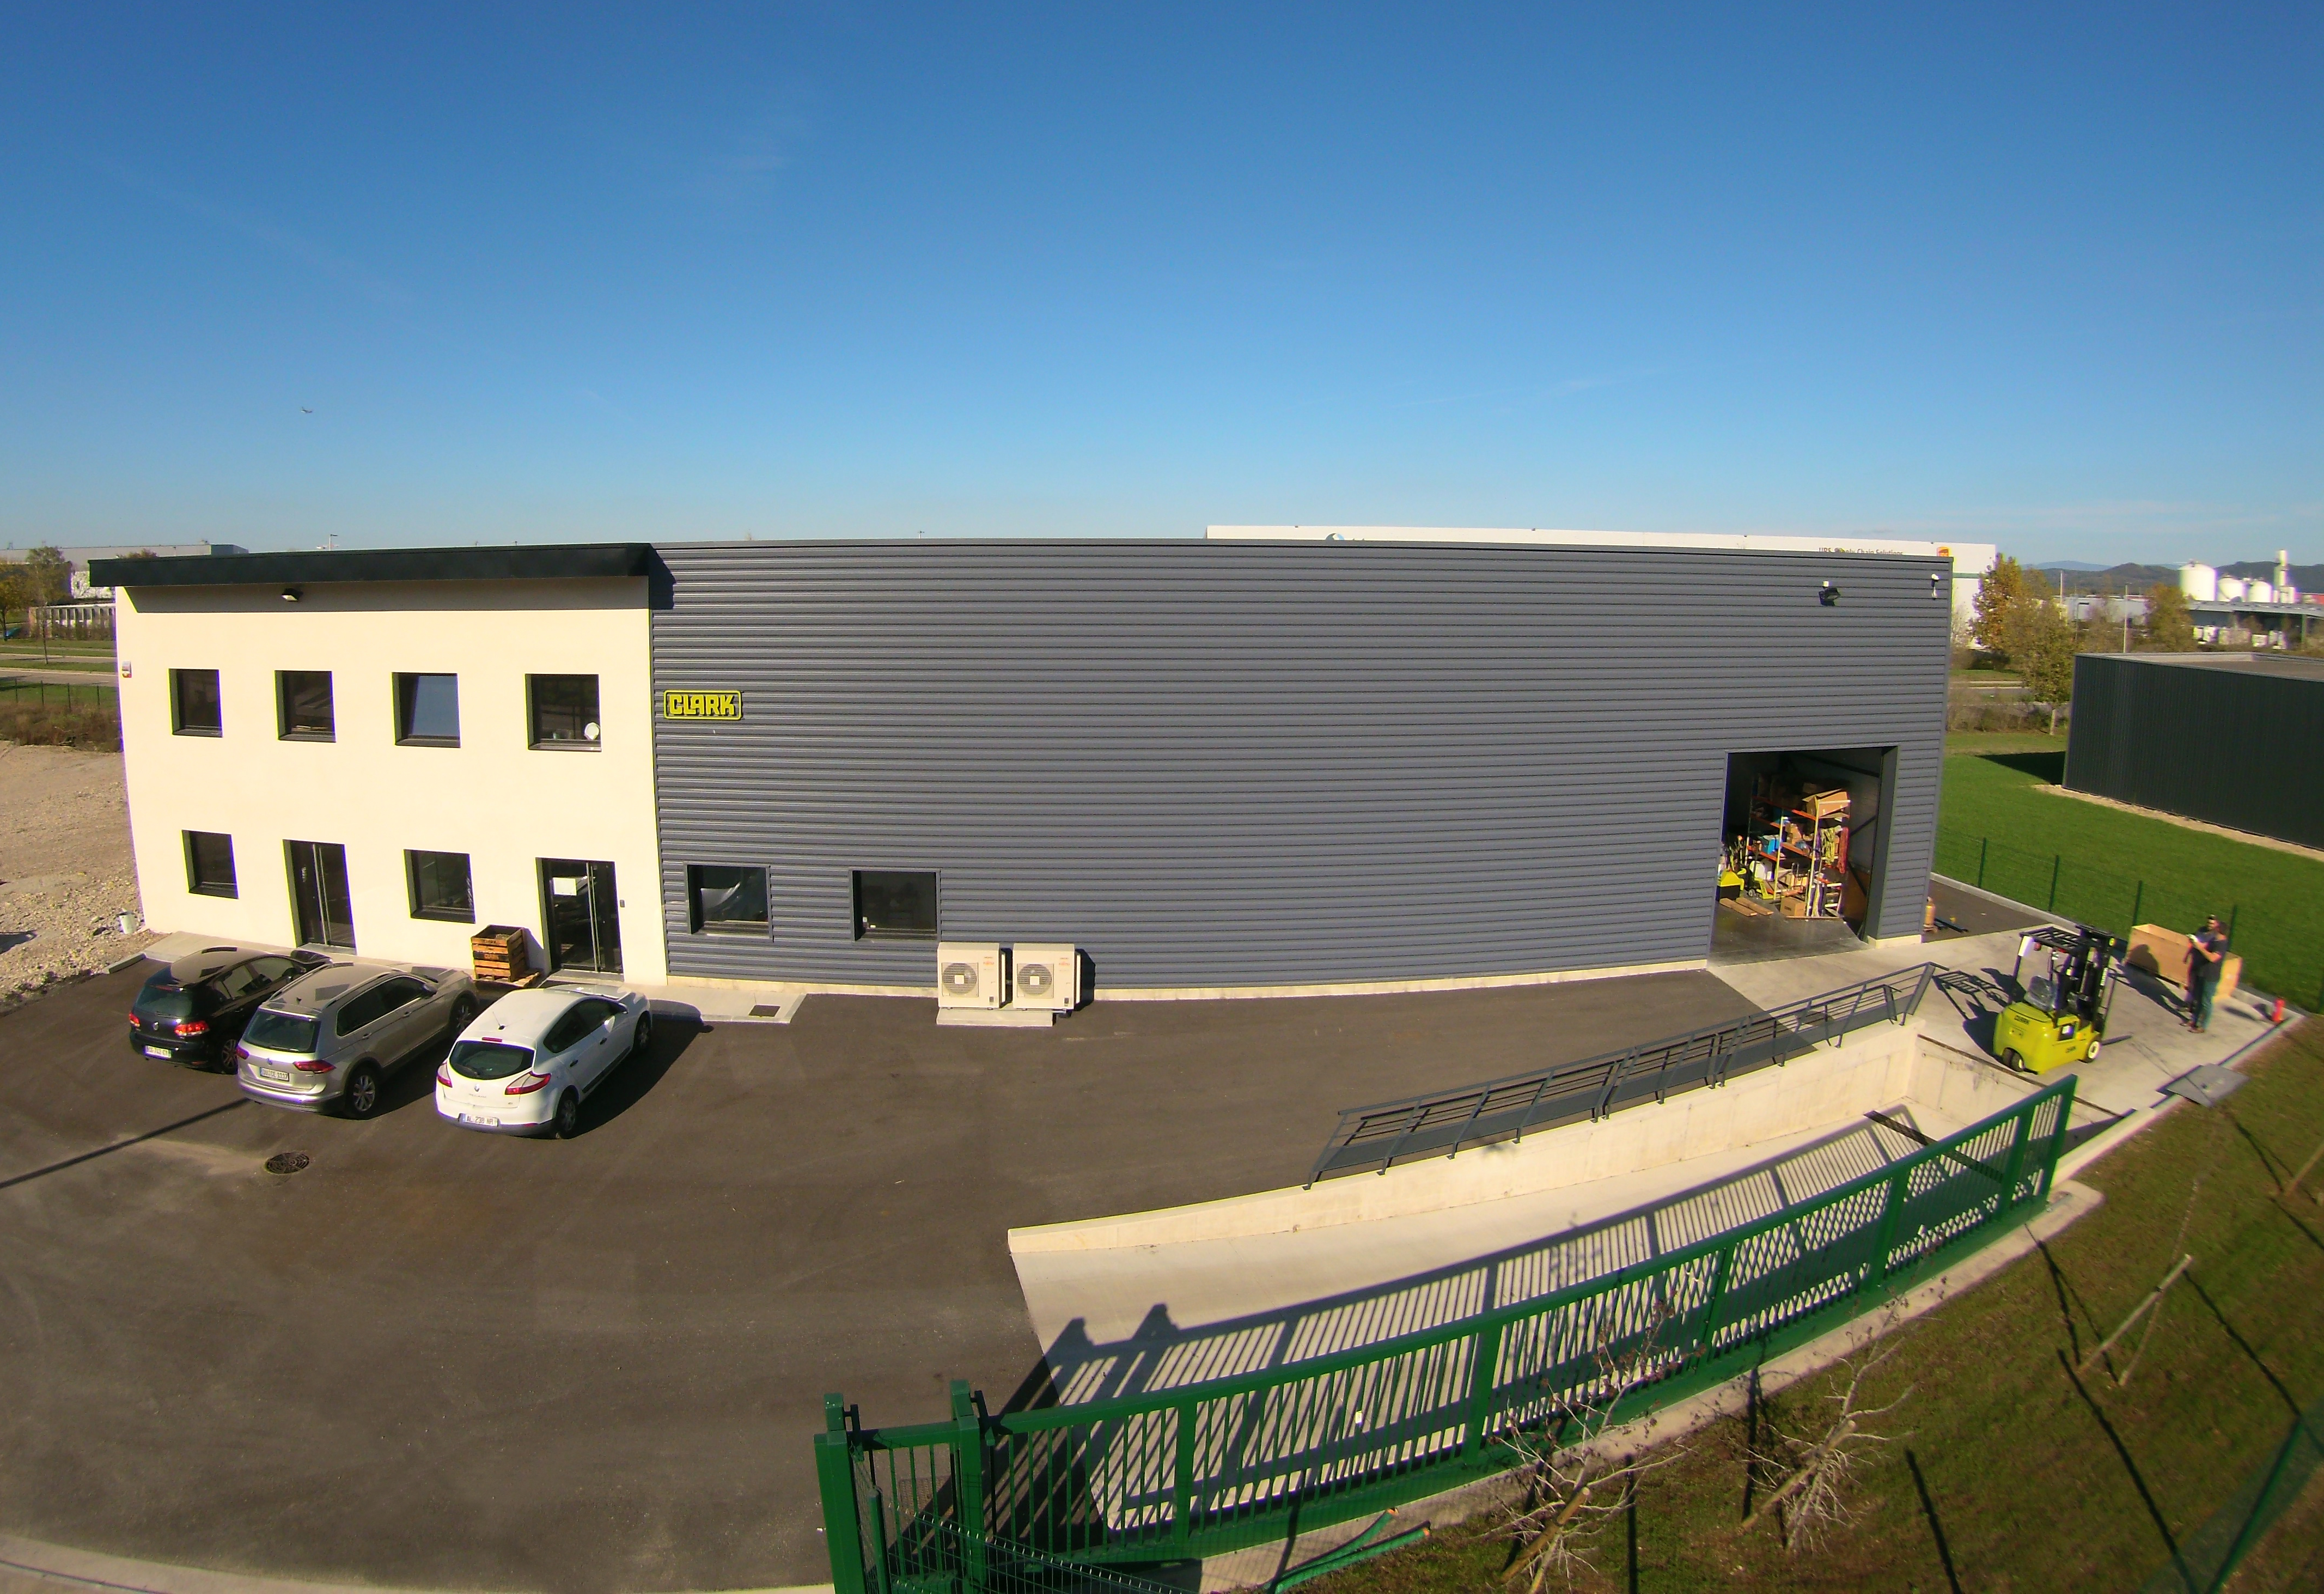 Clark France has moved into a new company building in Saint-Quentin-Fallavier and has thus set the course for the future